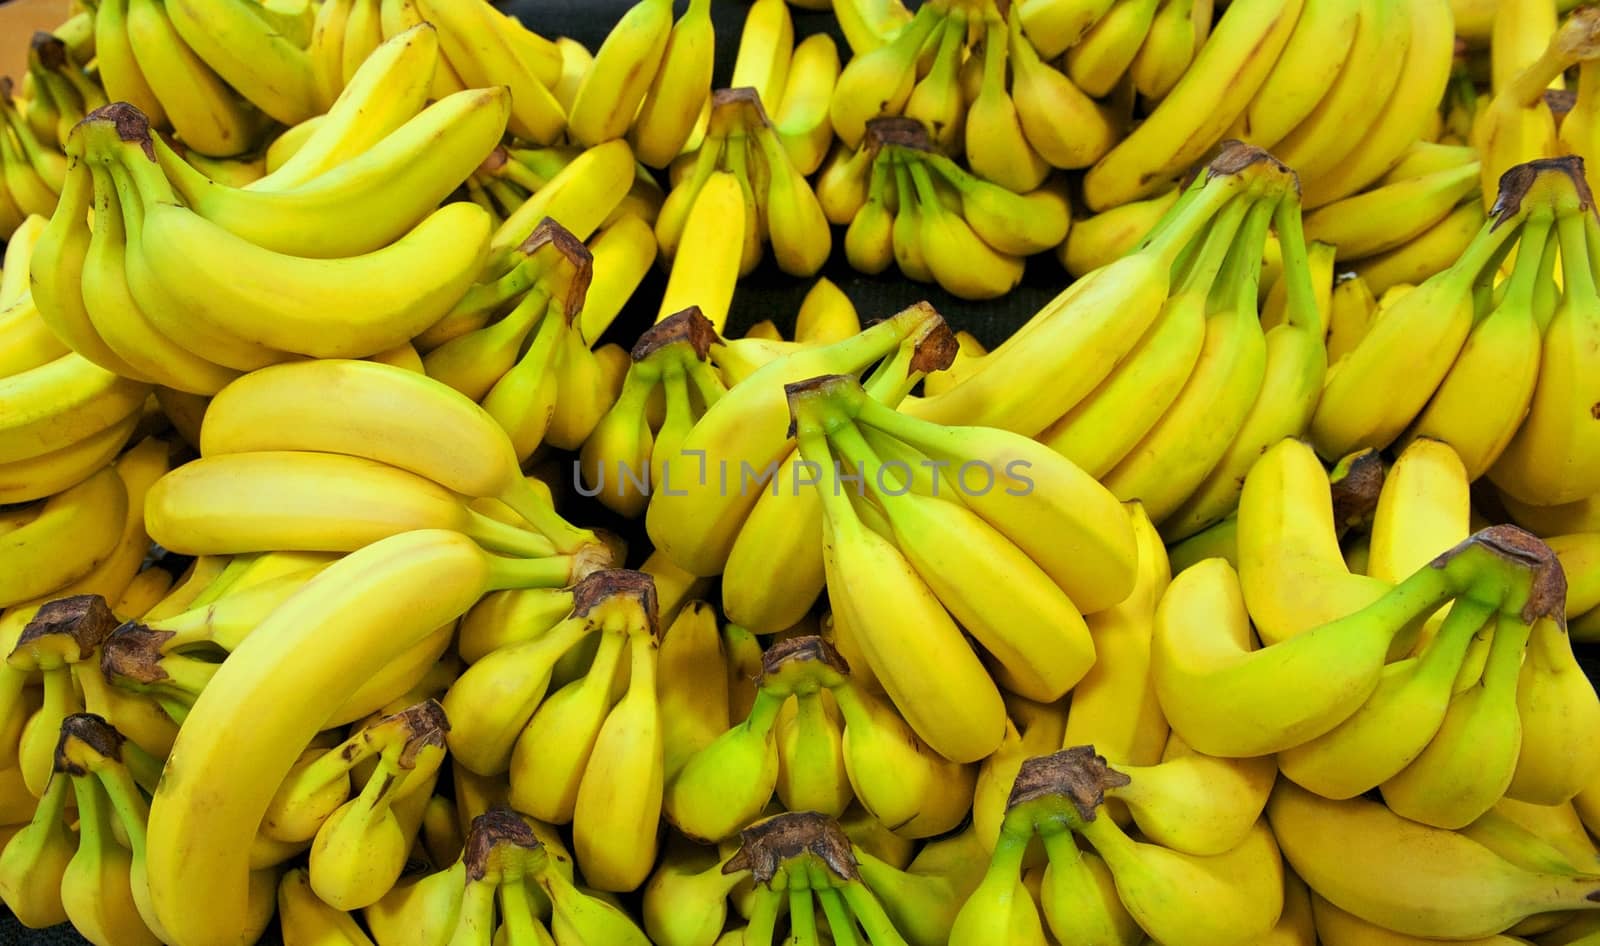 Yellow and green bananas are arranged in a pile in a grocery store